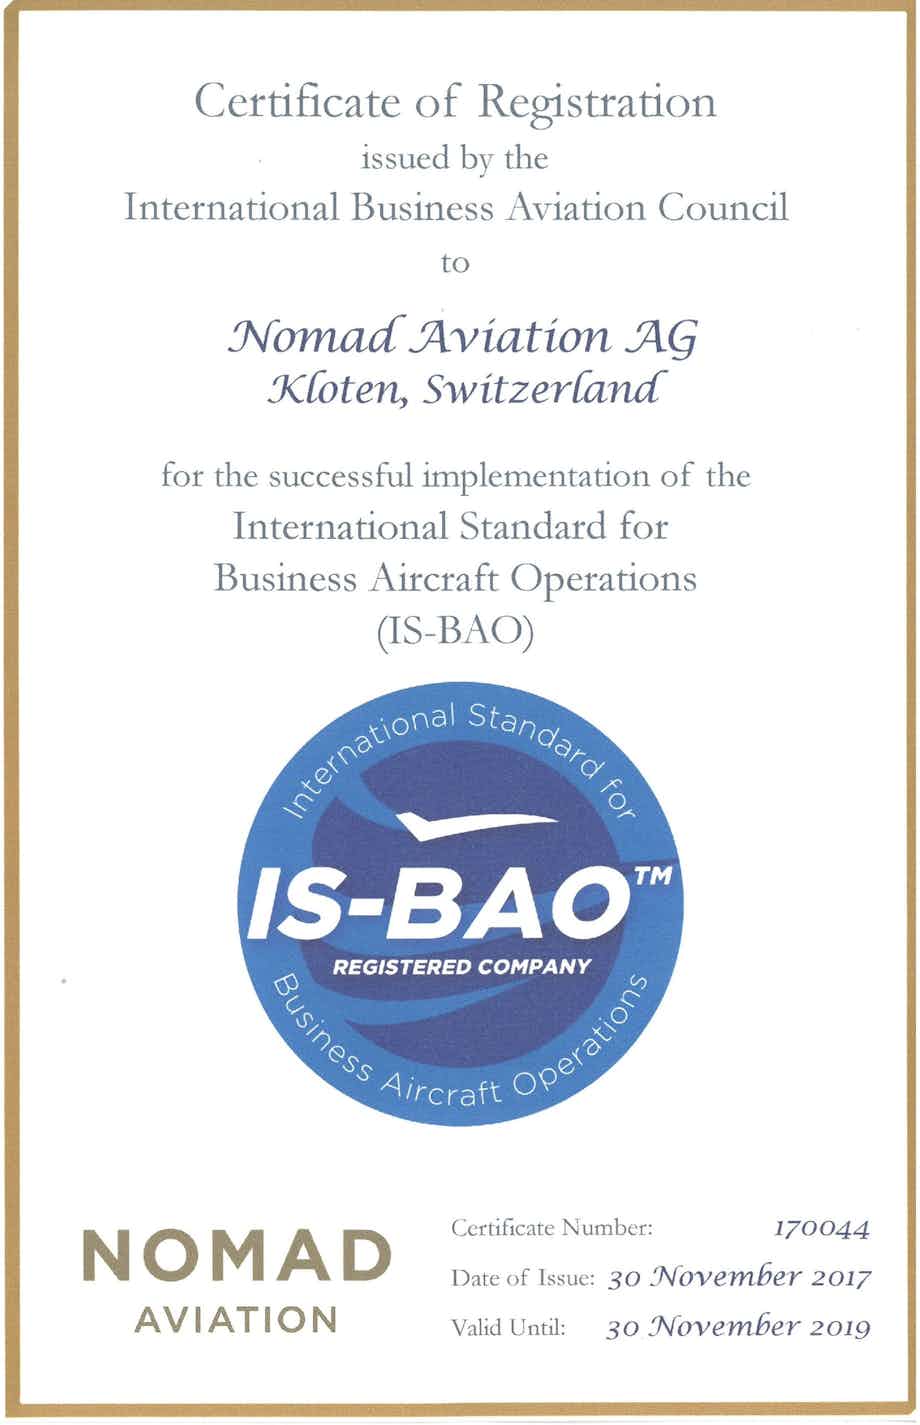 Nomad Aviation receives IS-BAO Registration Certificate